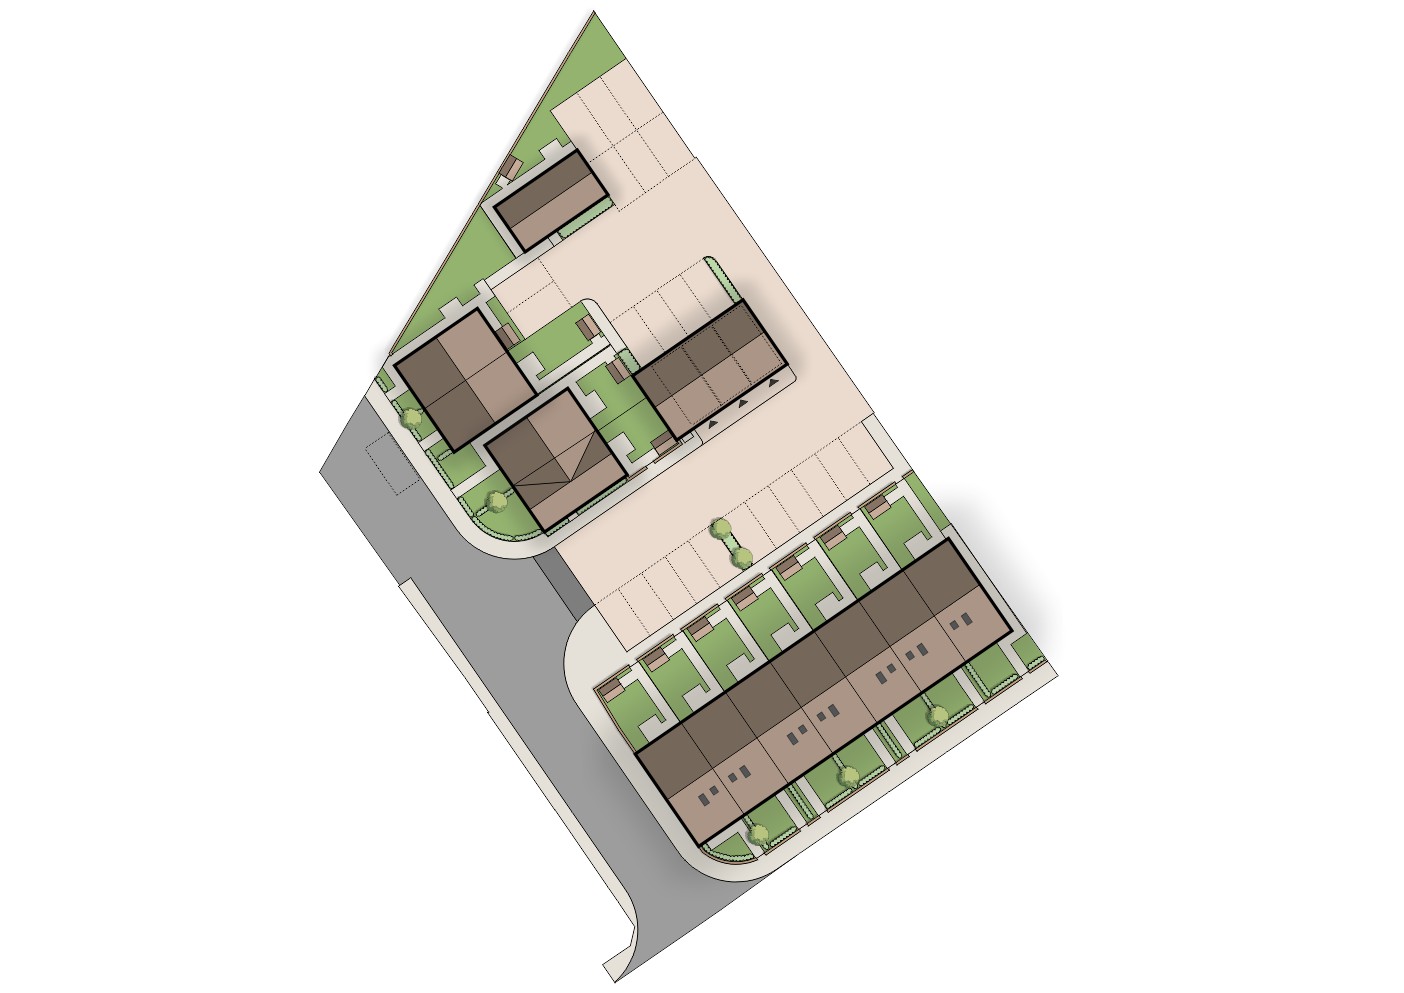 colour elevation drawing housing development new homes planning application swindon cotswolds wiltshire